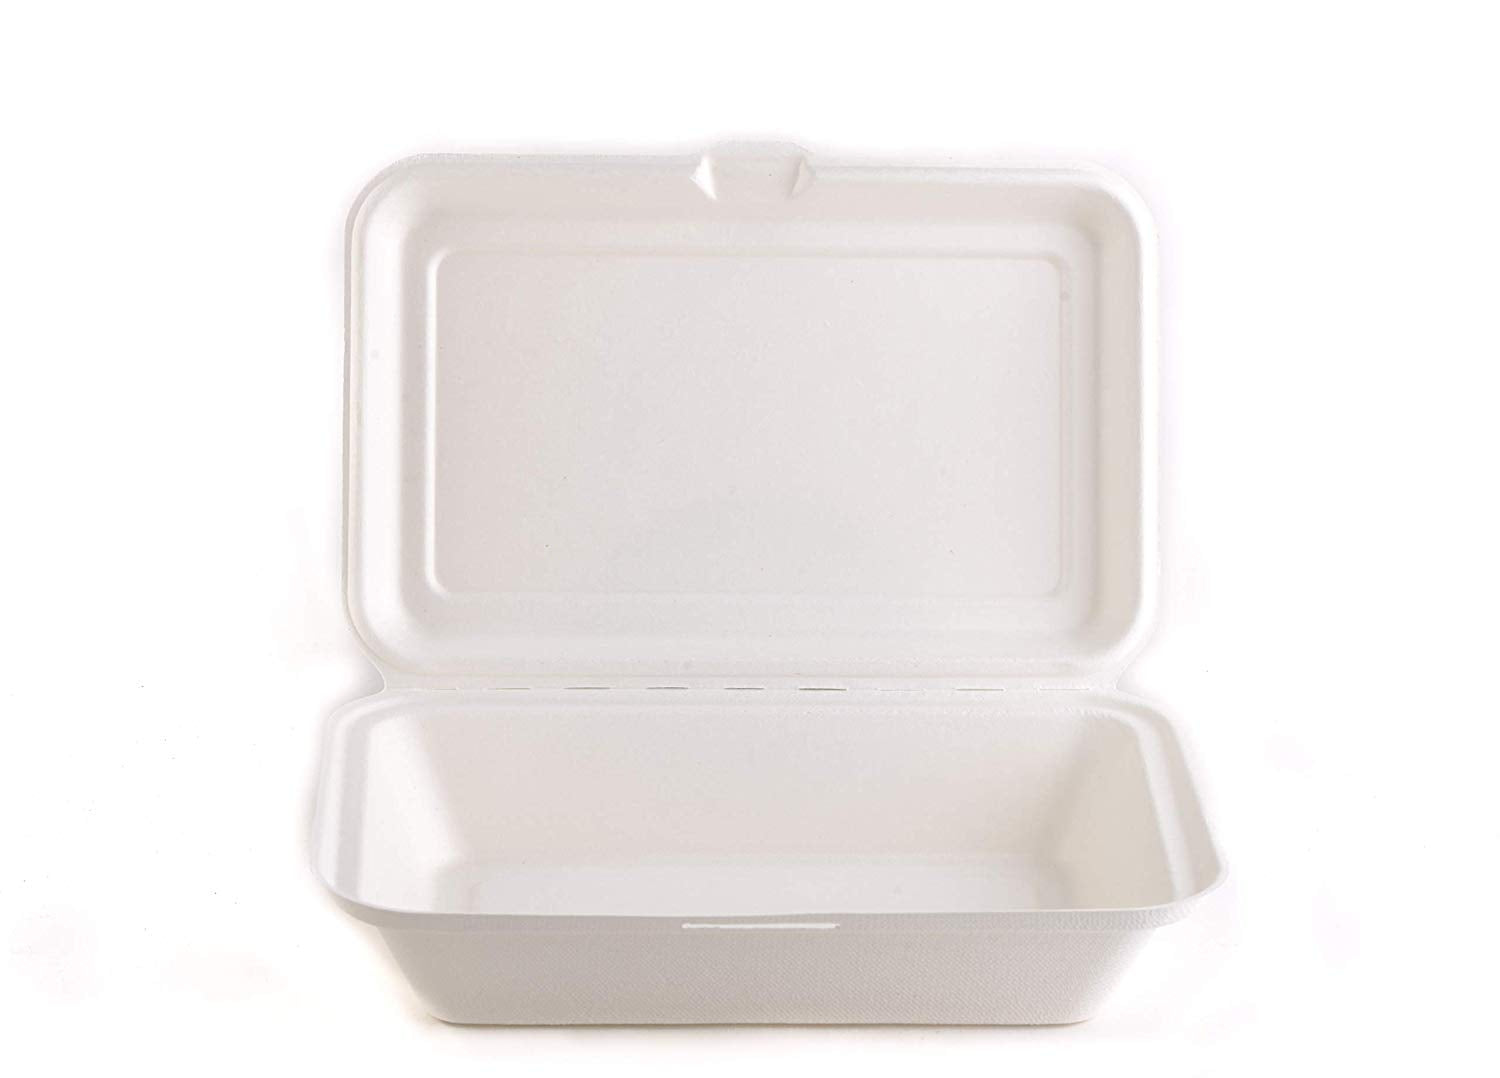 Compostable Biodegradable Take Out Food Containers with Clamshell Hinged Lid Microwaveable, Disposable Takeout Box to Carry Meals Togo [6x6, 9x9, 9x6]